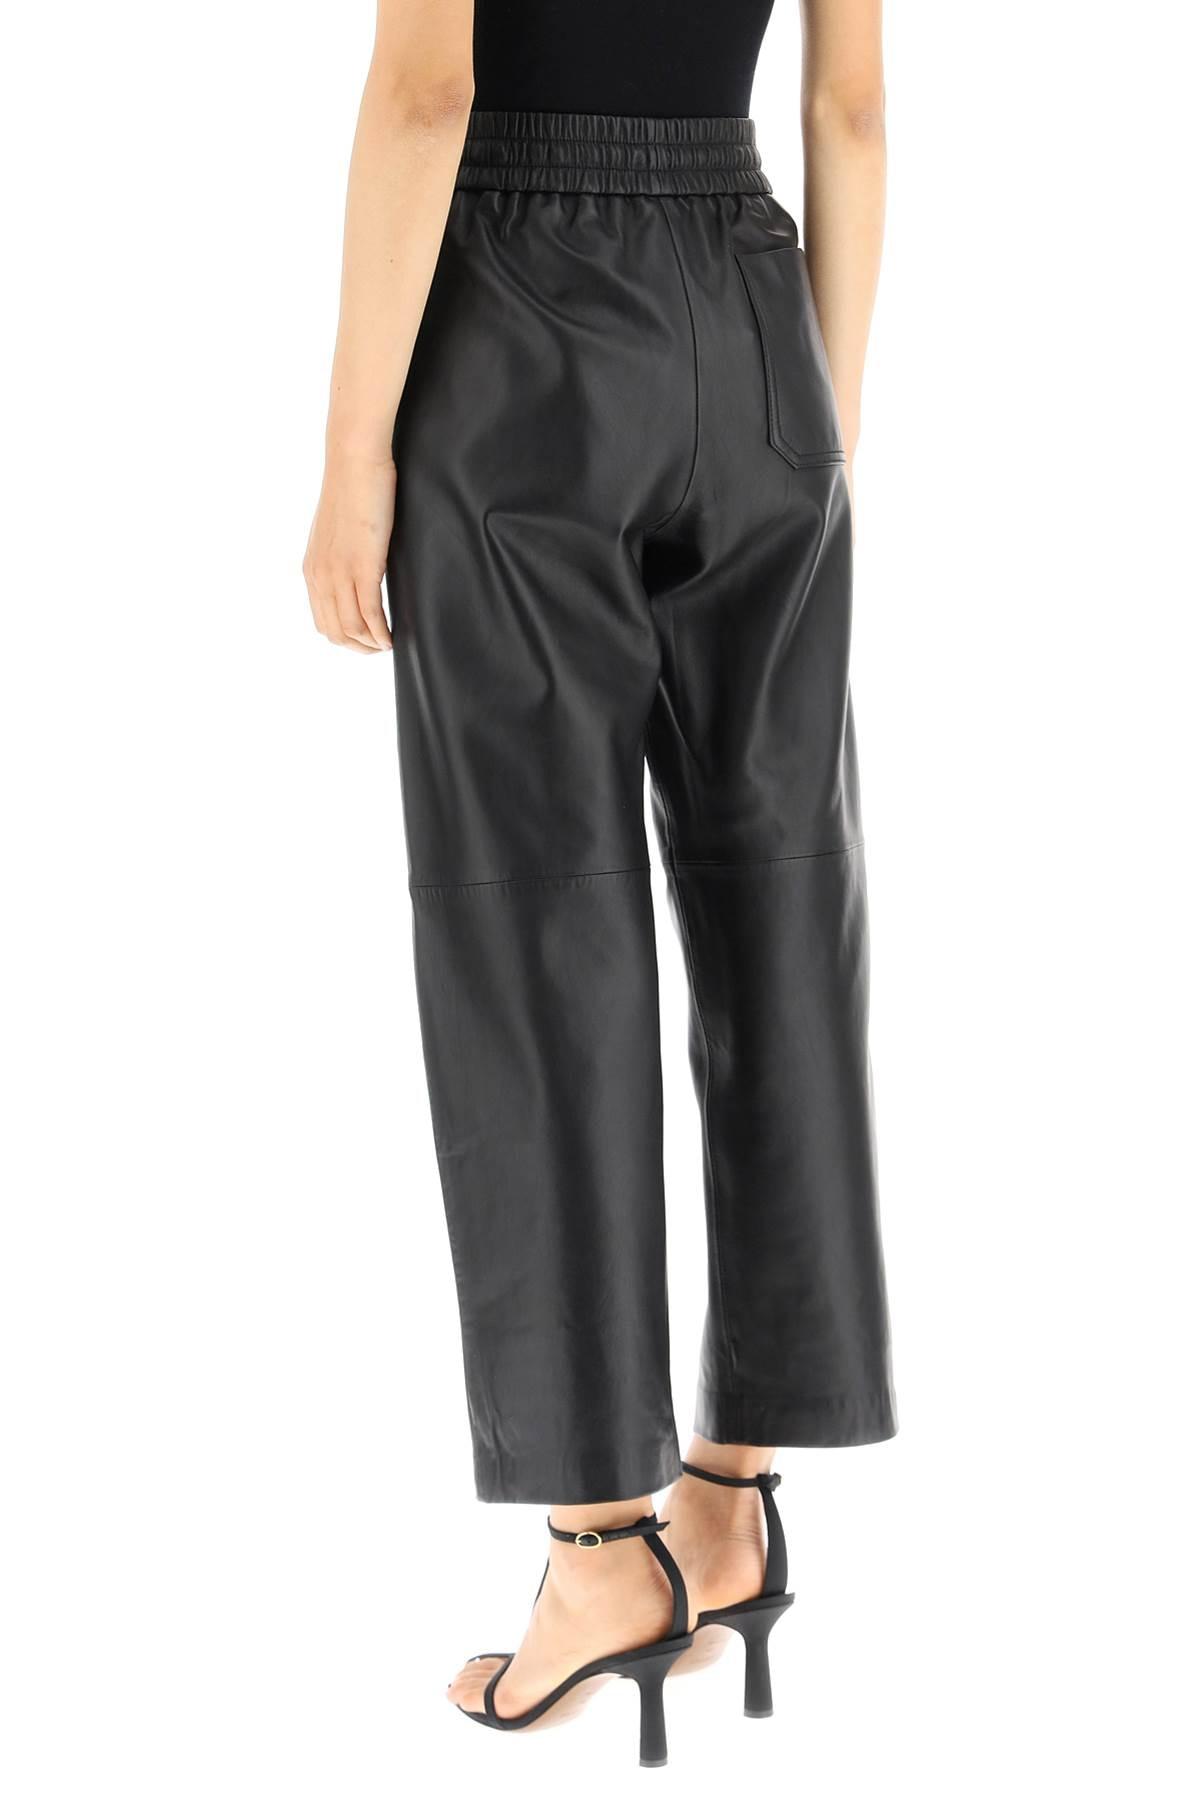 Weekend by Maxmara Nappa Leather Trousers in Gray | Lyst